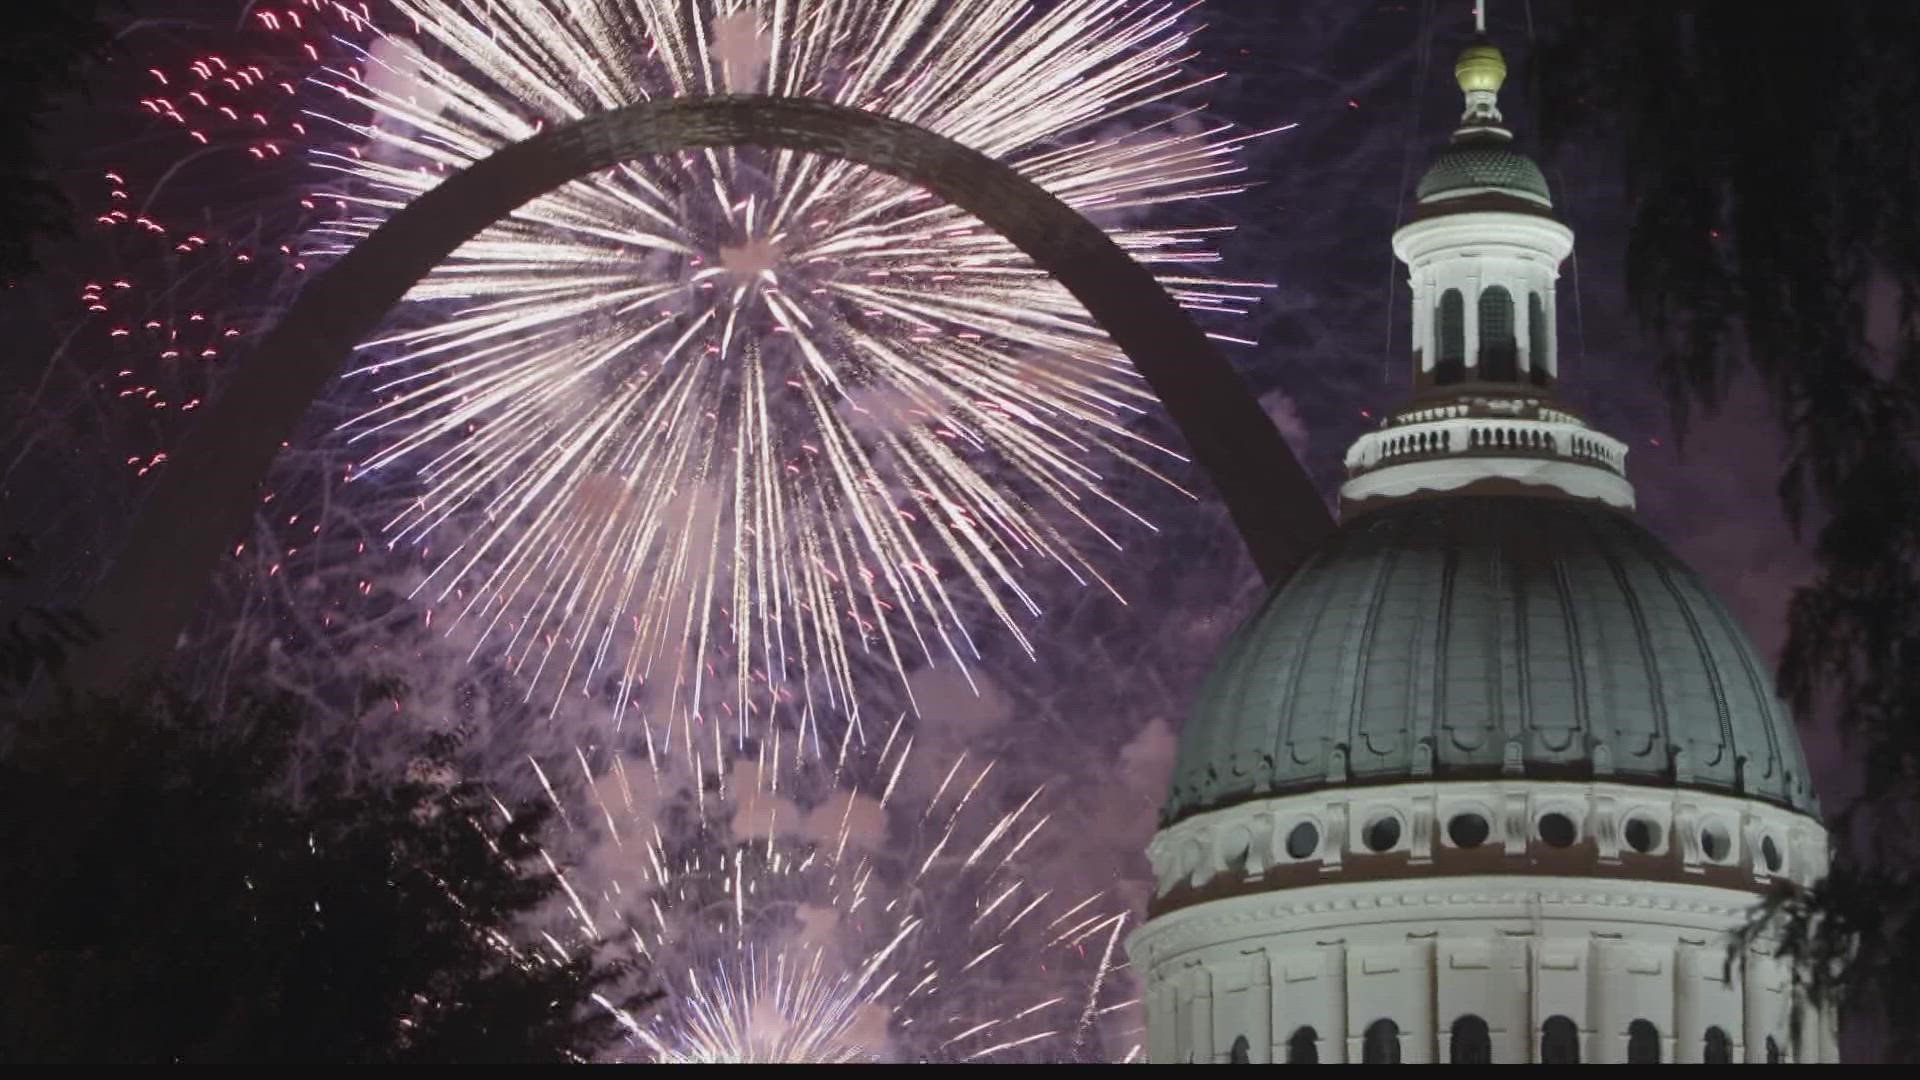 St. Louis is rich with history and symbols of America's long-enduring fight for freedom.